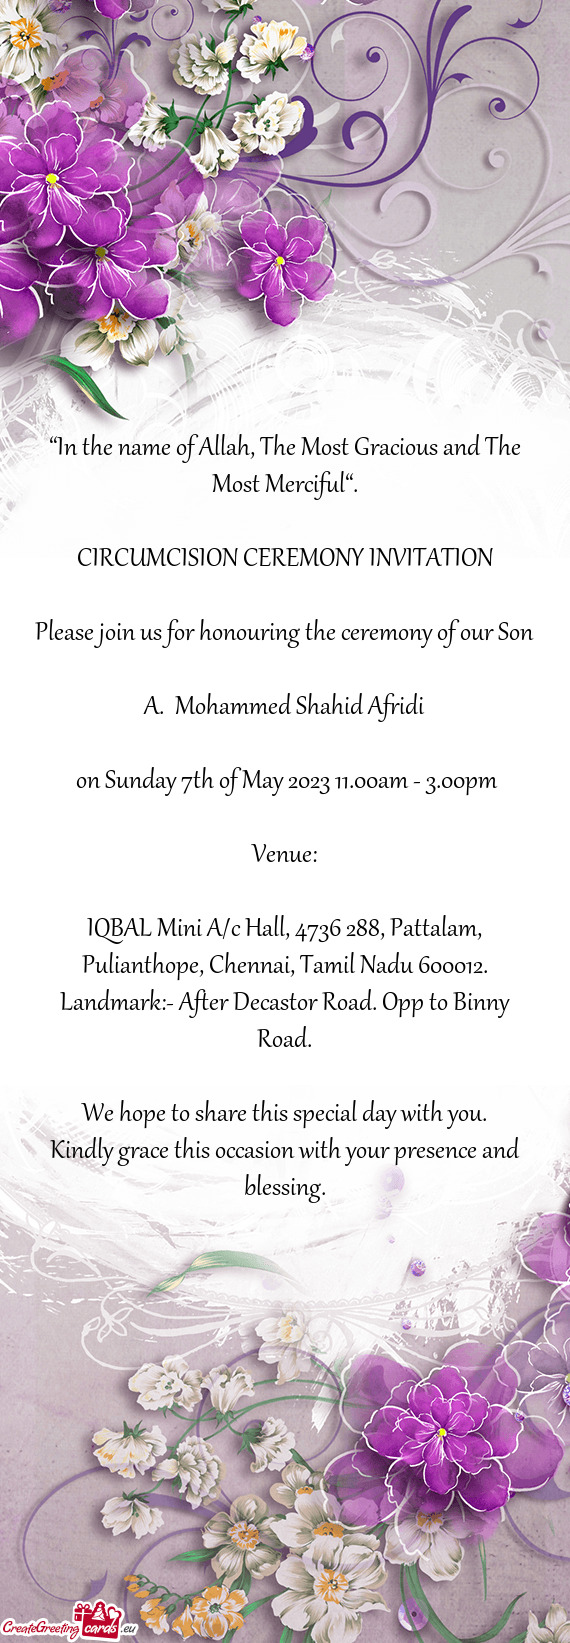 Please join us for honouring the ceremony of our Son